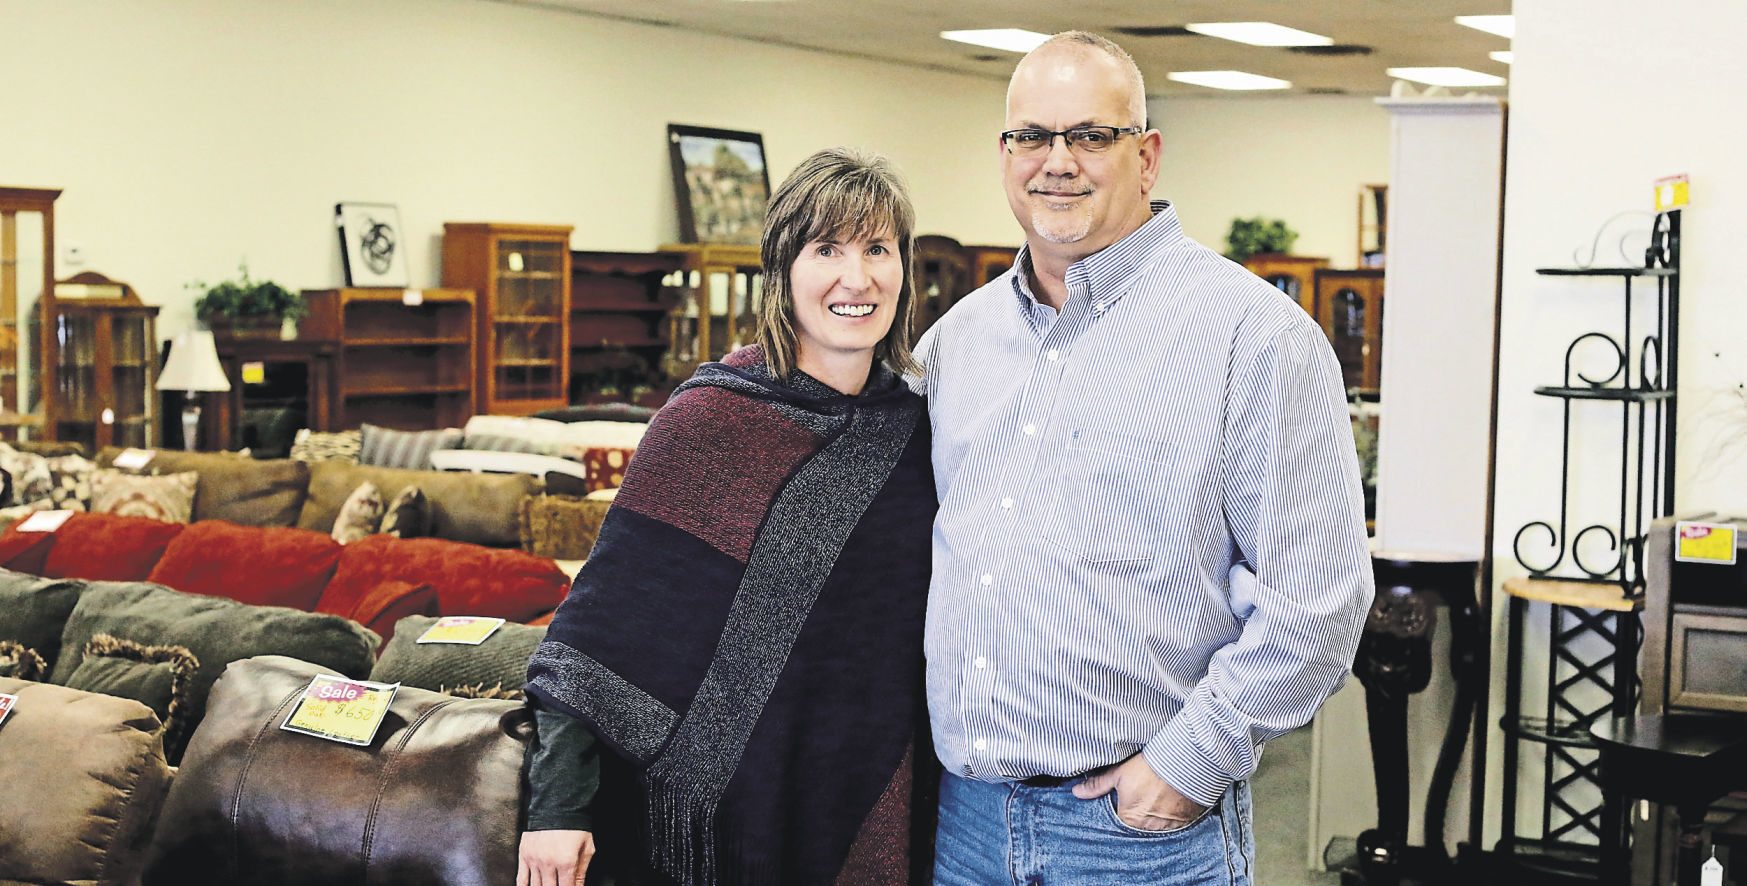 Lois Thurston (left) and Gary Higgins operate Affordable Furniture and Treasurers in Dubuque. It offers new and slightly used items to decorate a home. PHOTO CREDIT: EILEEN MESLAR